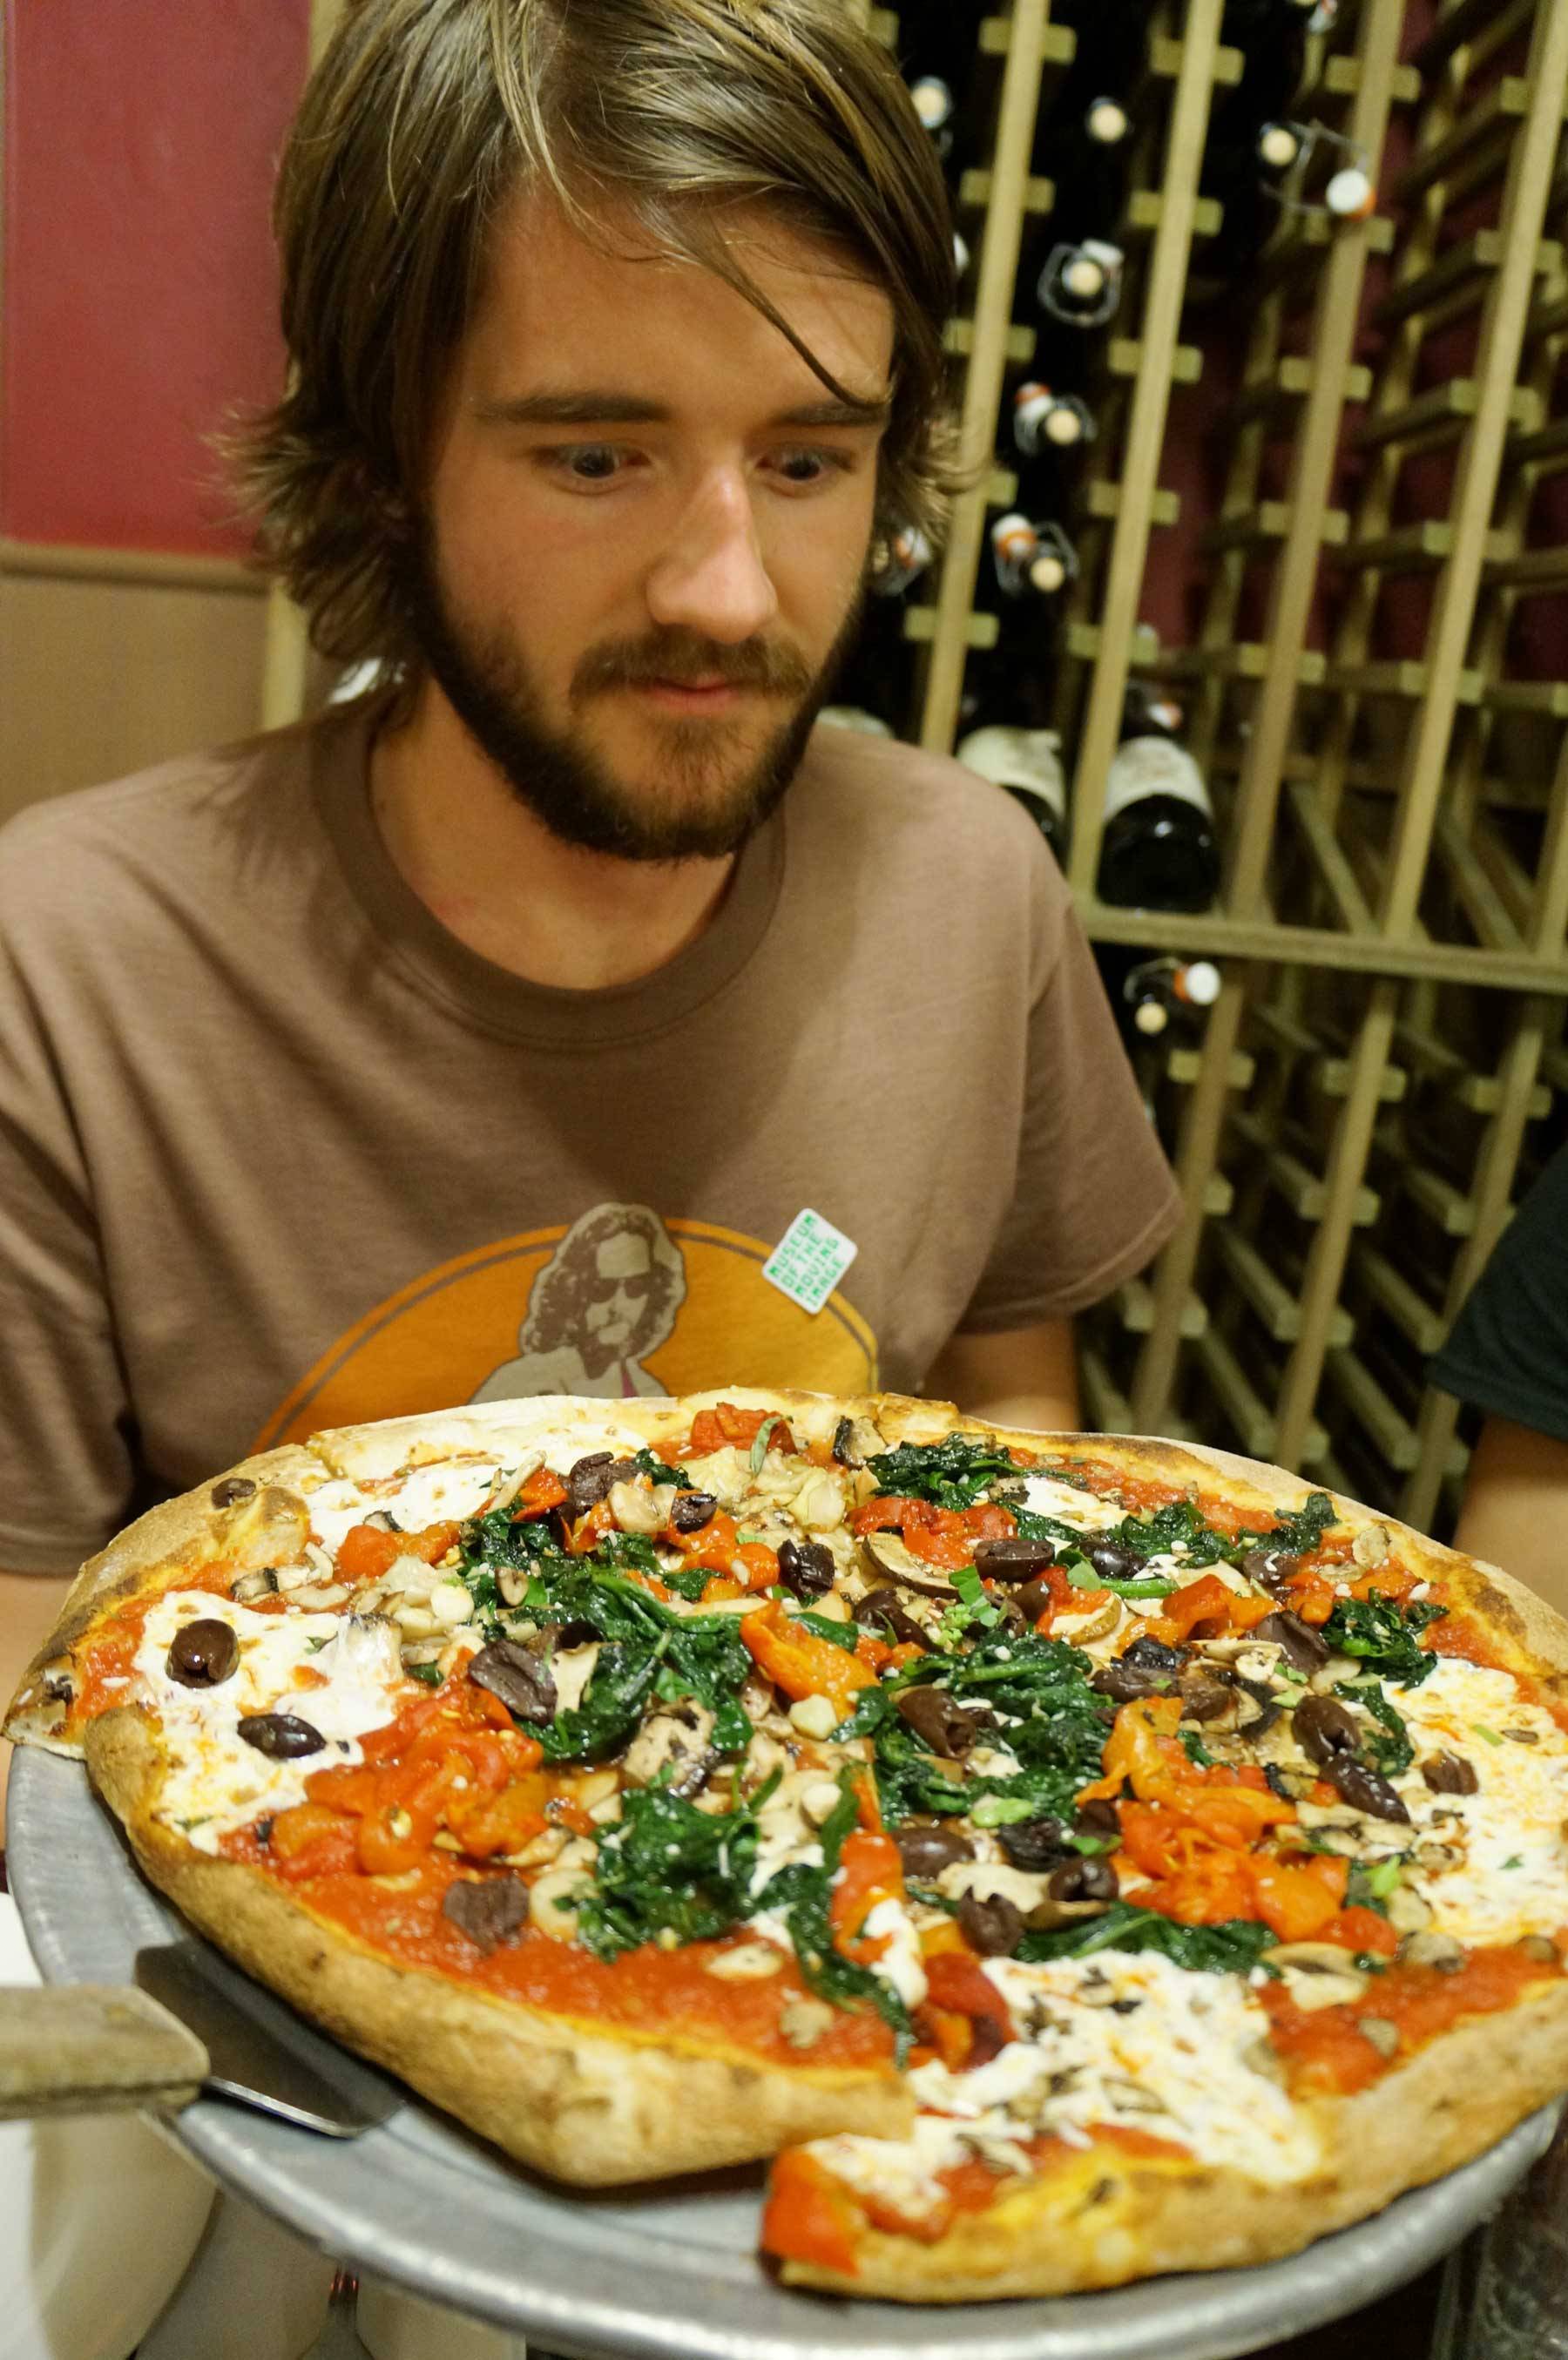 Butcher with his pizza